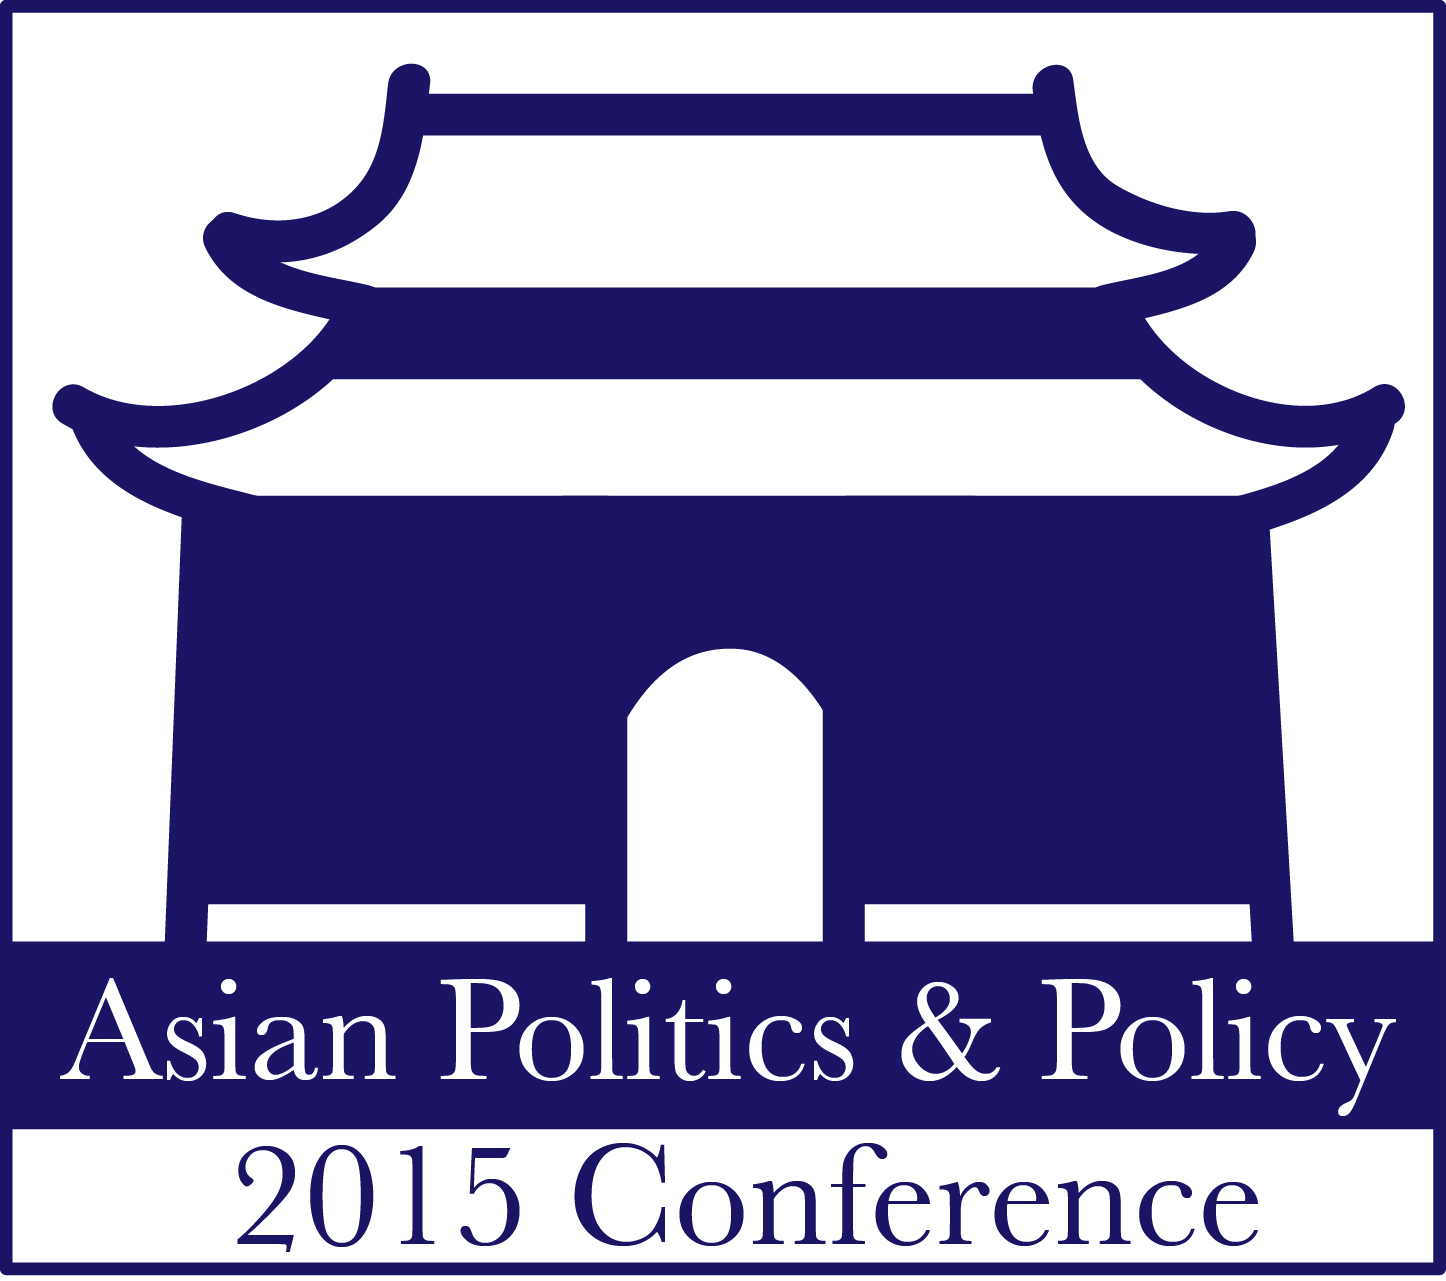 Asian politics and policy